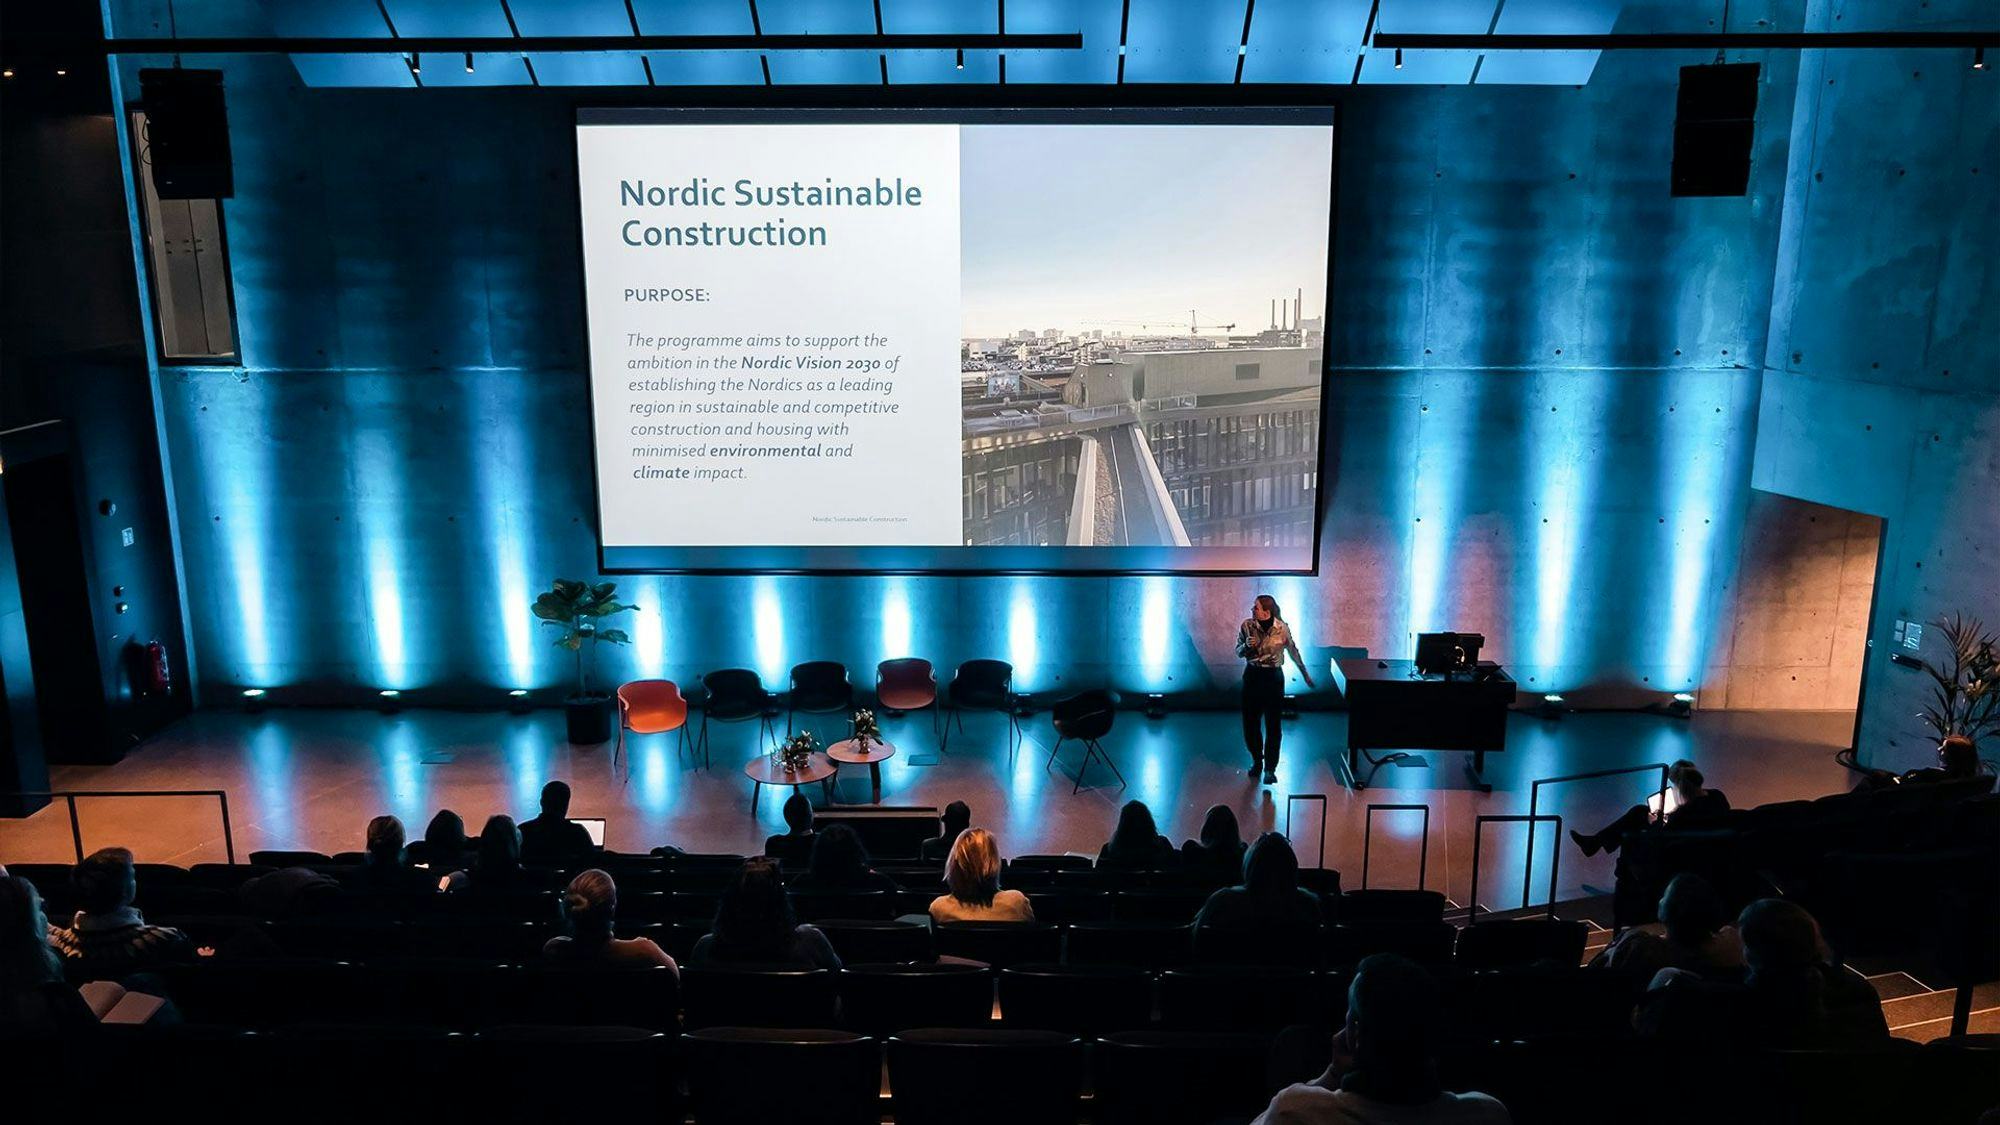 A dark auditorium with a large presentation screen displaying "Nordic Sustainable Construction" material